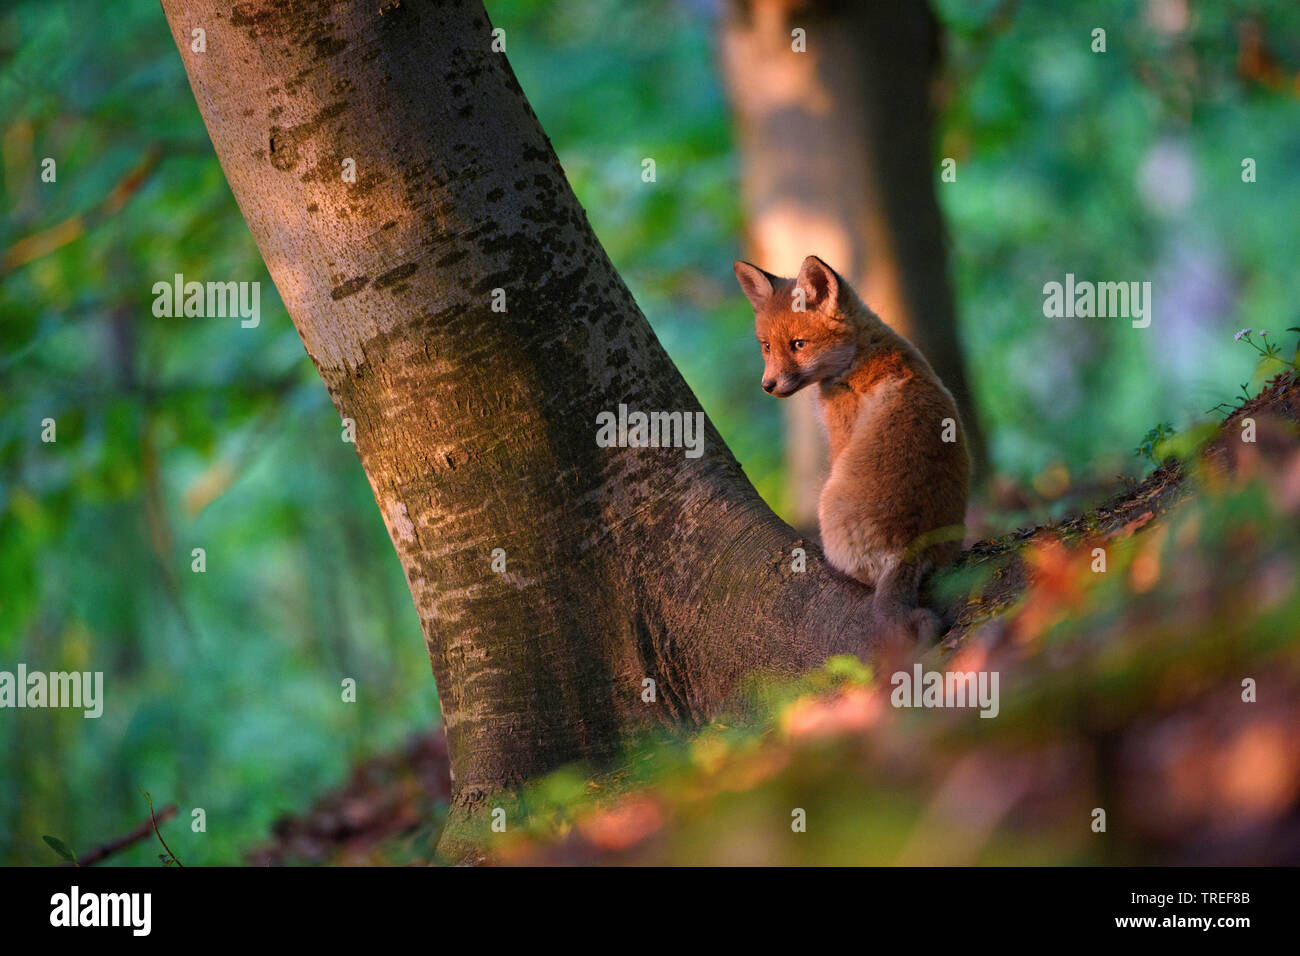 red fox (Vulpes vulpes), red fox cub sitting in a forest at a tree , Germany, Bavaria Stock Photo